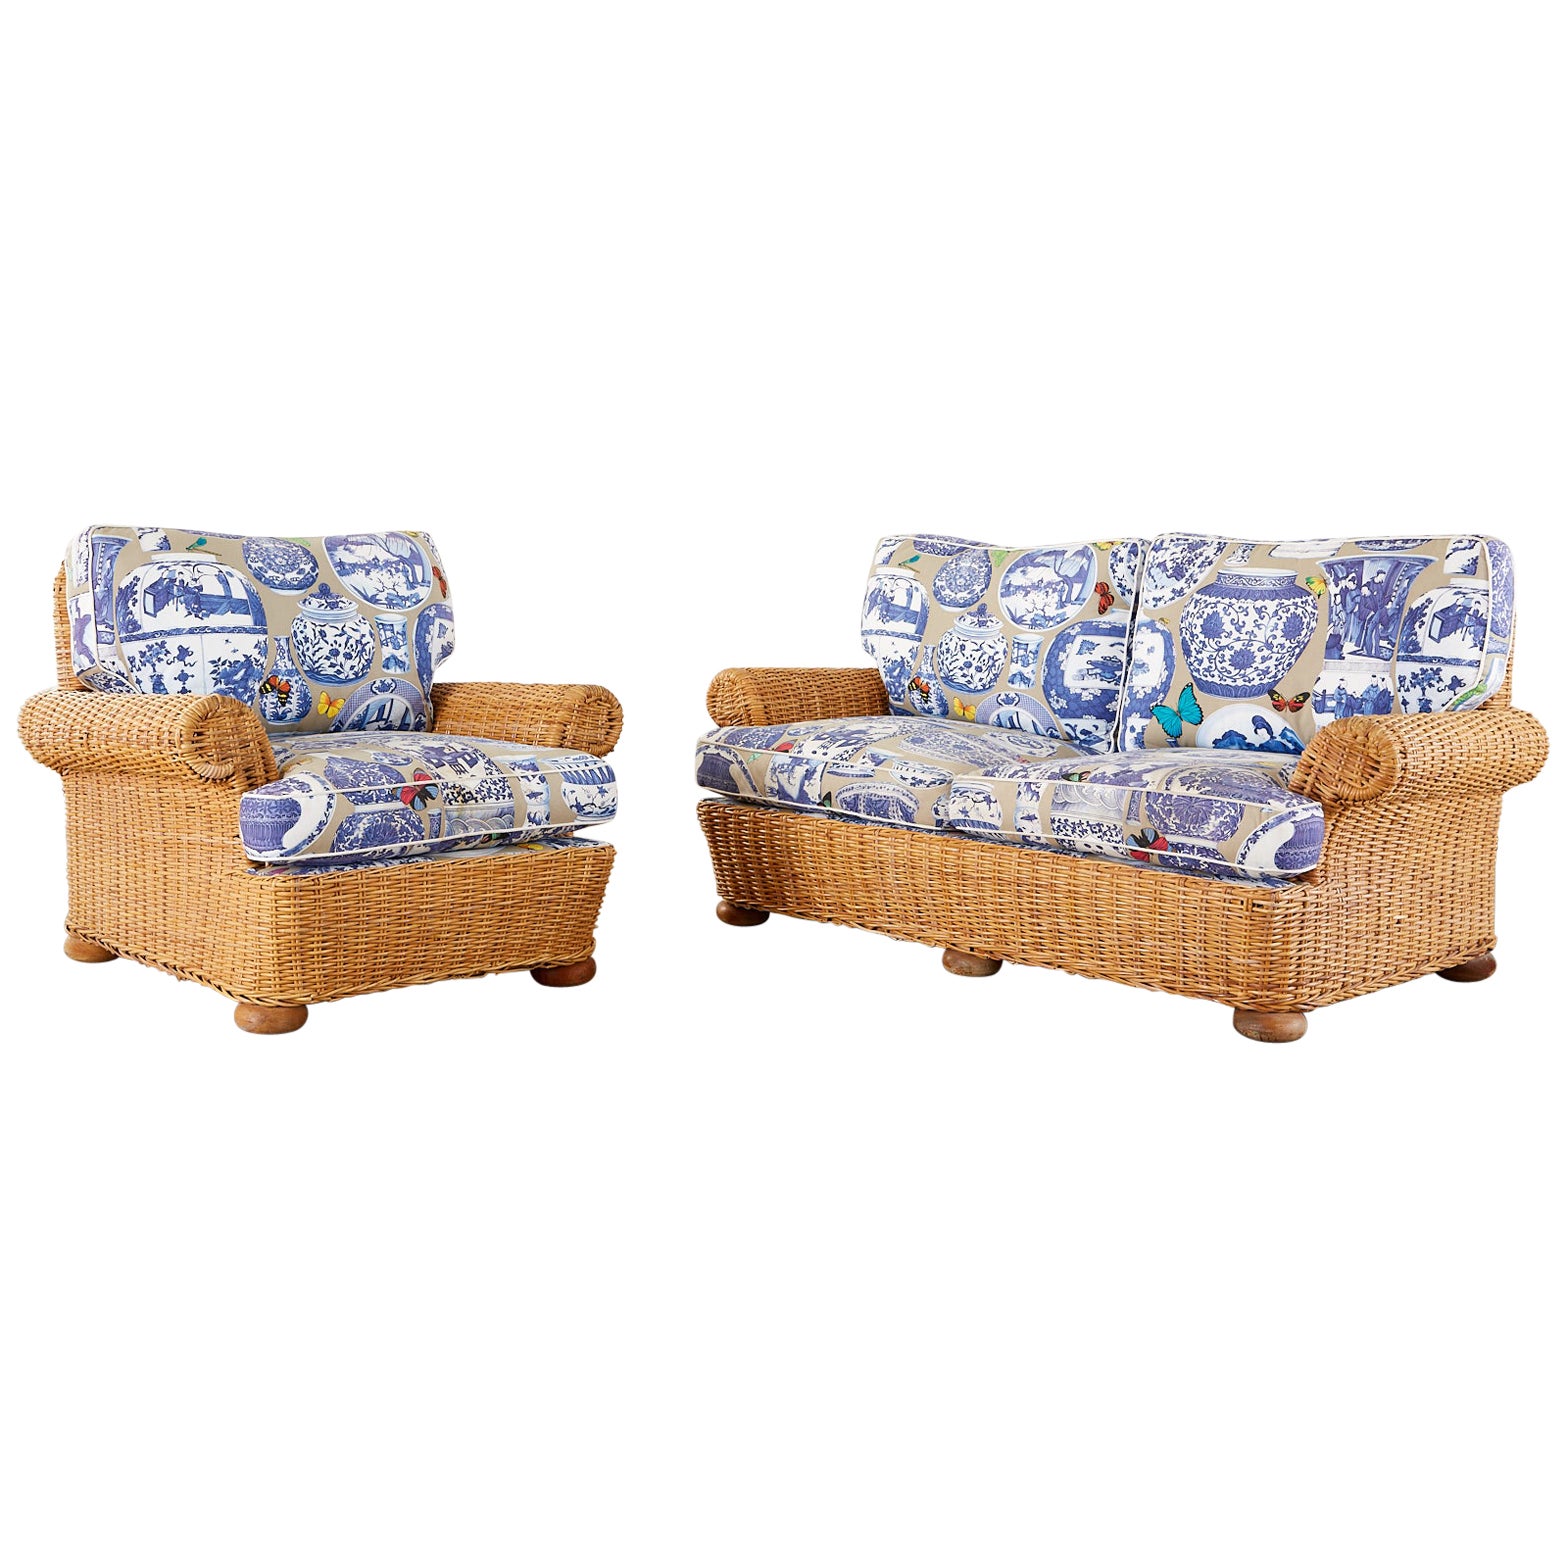 Wicker Rattan Settee and Armchair Chinoiserie Blue and White Upholstery For Sale